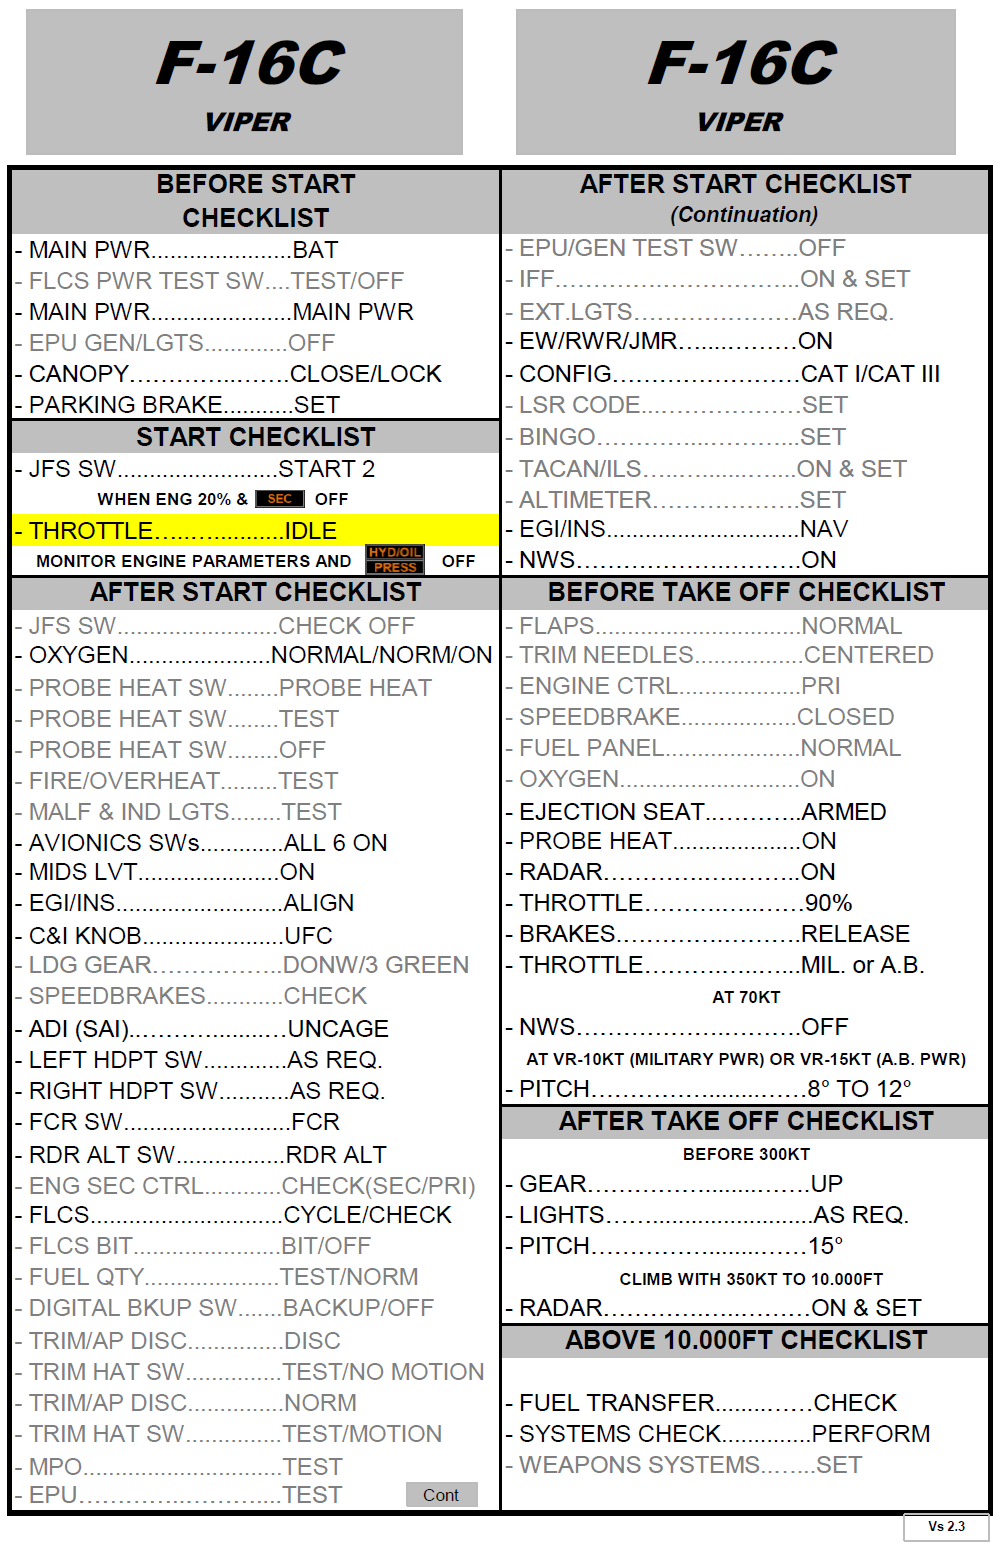 F-16C Quick Checklist. (Update vs 2.3 - New Engine parameters for Start - 20% e SEC Extinguished).